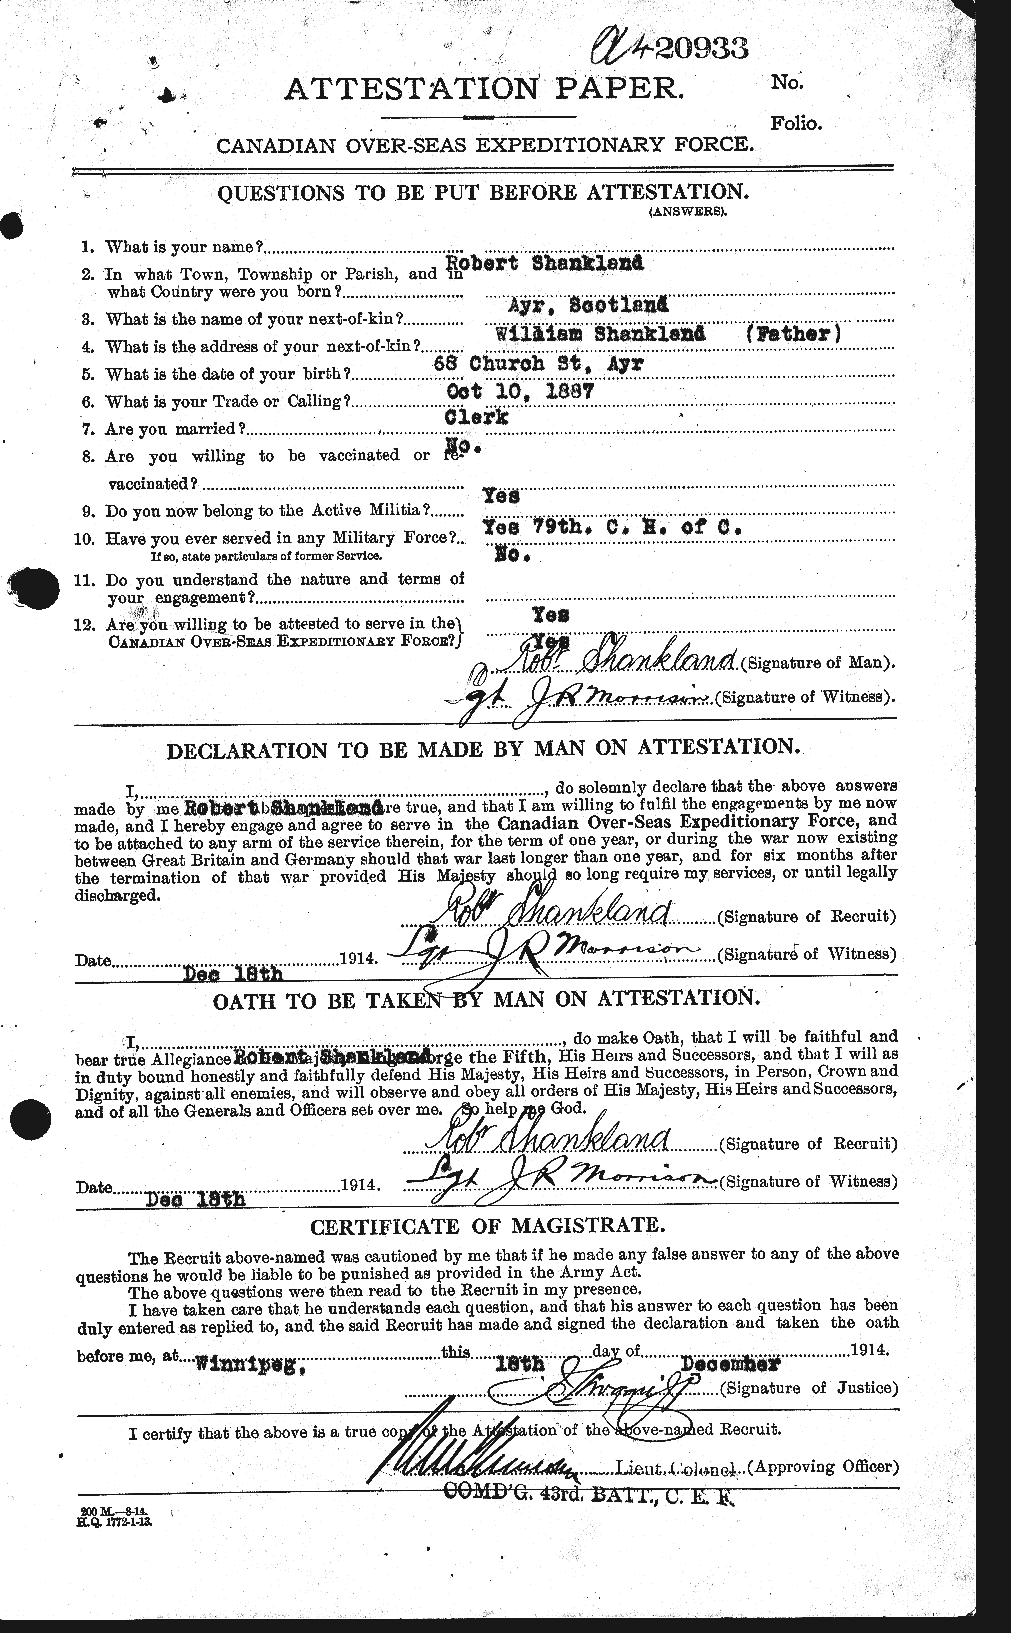 Personnel Records of the First World War - CEF 089162a